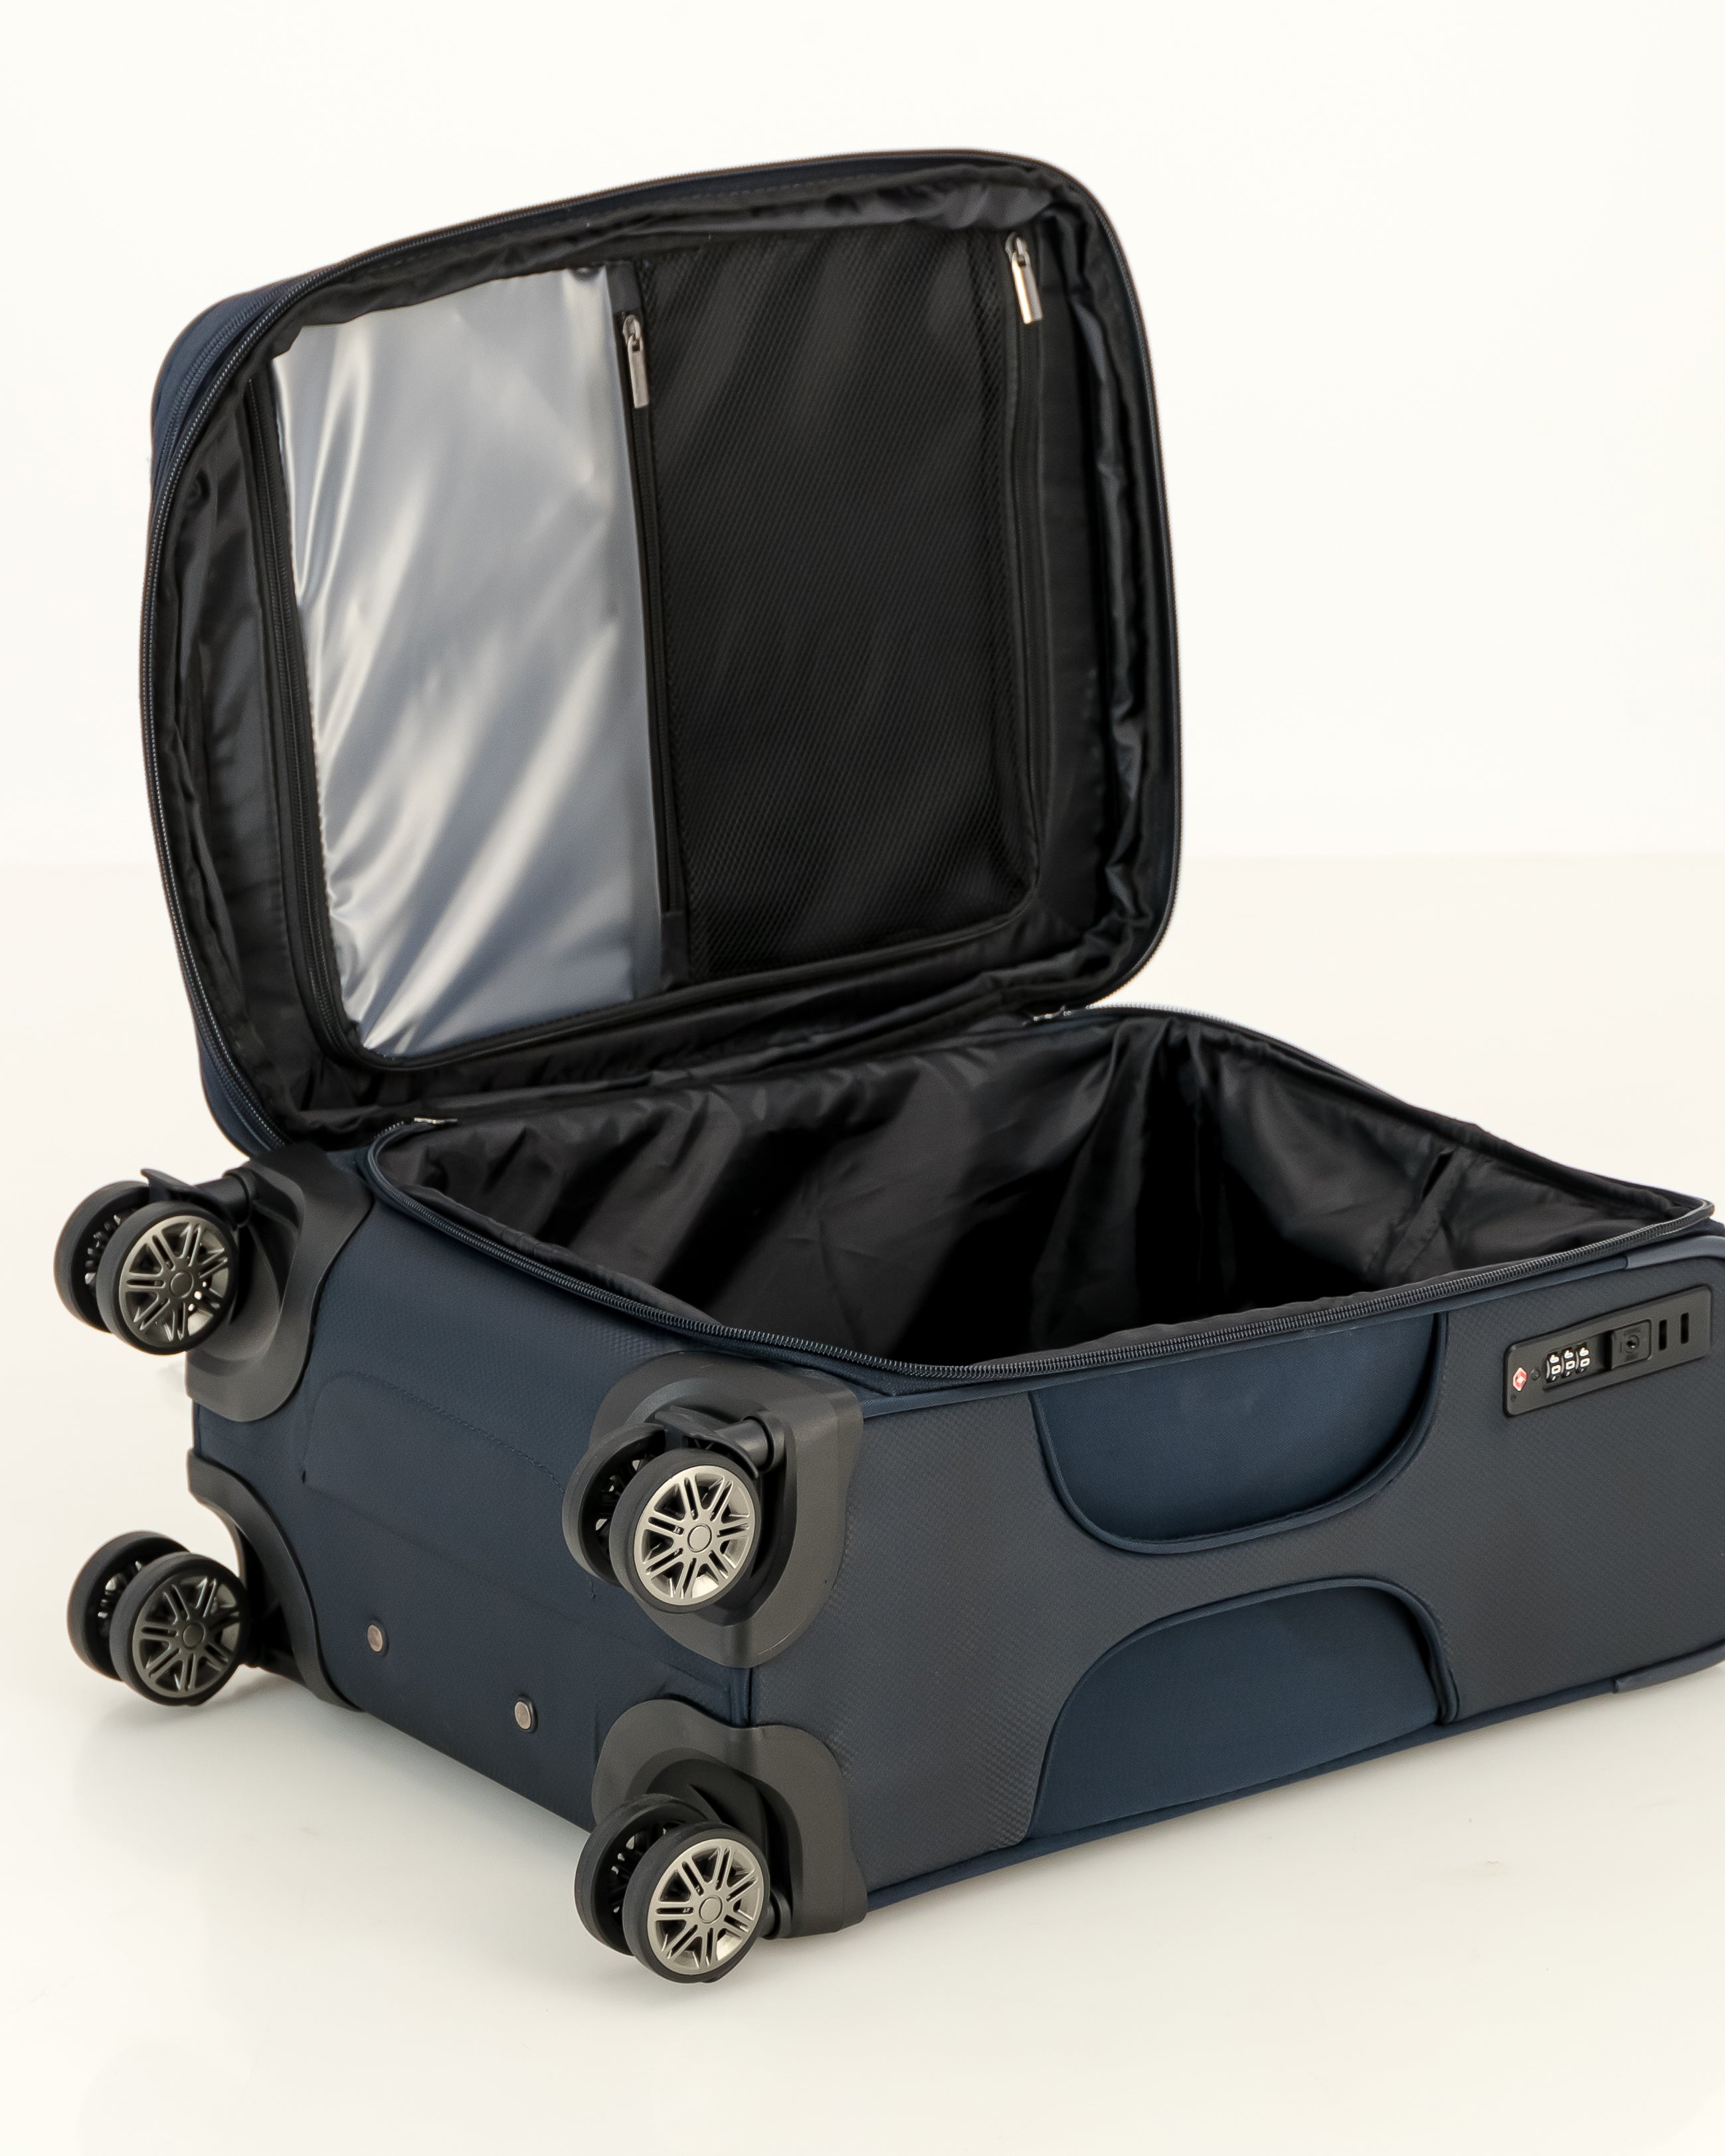 So-Fly X-Lite 4 Wheel Spinner Cabin Suitcase